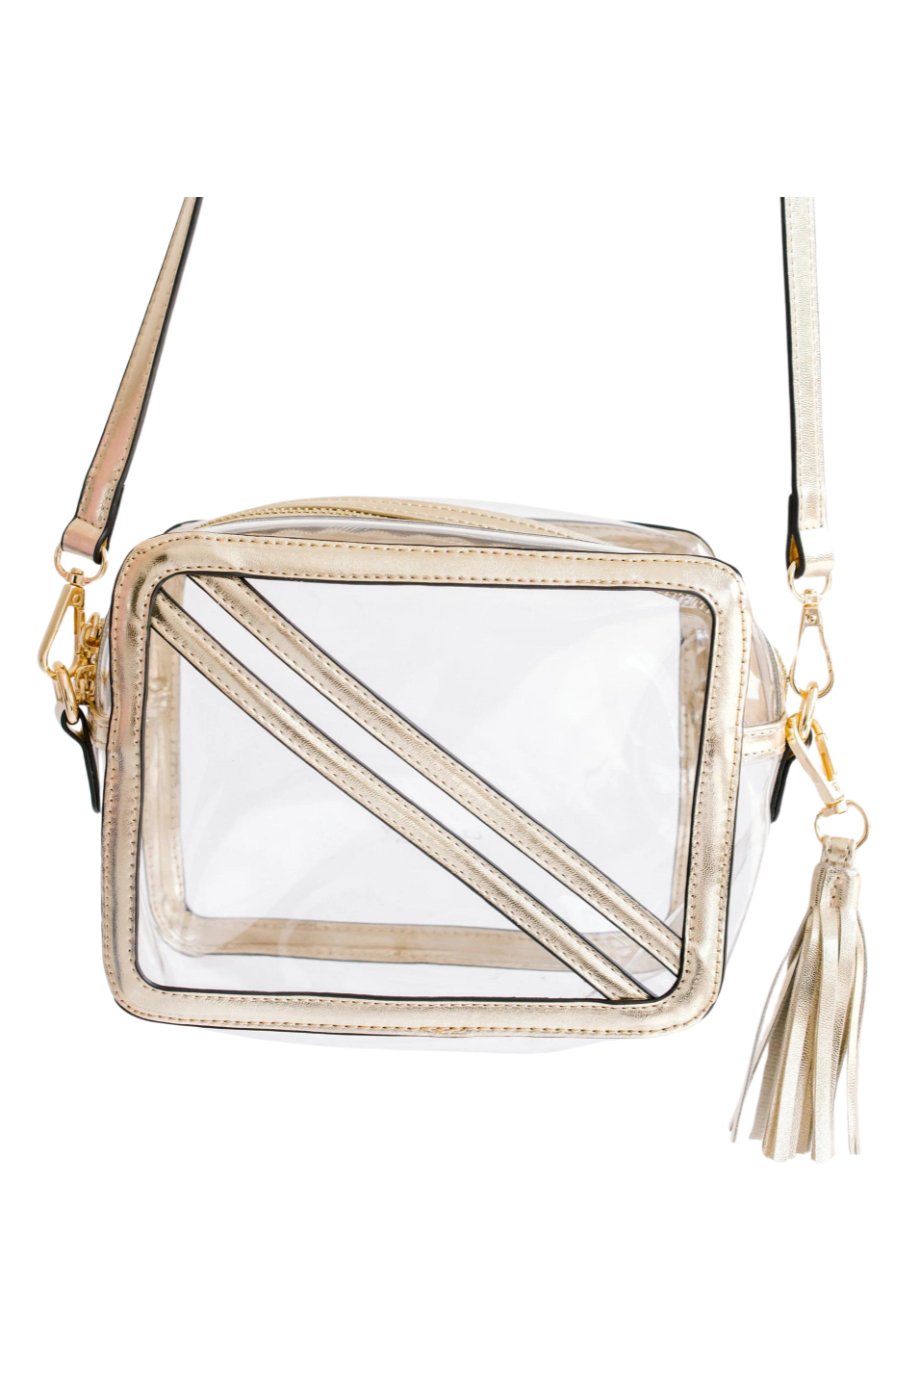 The Cline Gold + Clear Bag - Clearly Handbags - Color Game